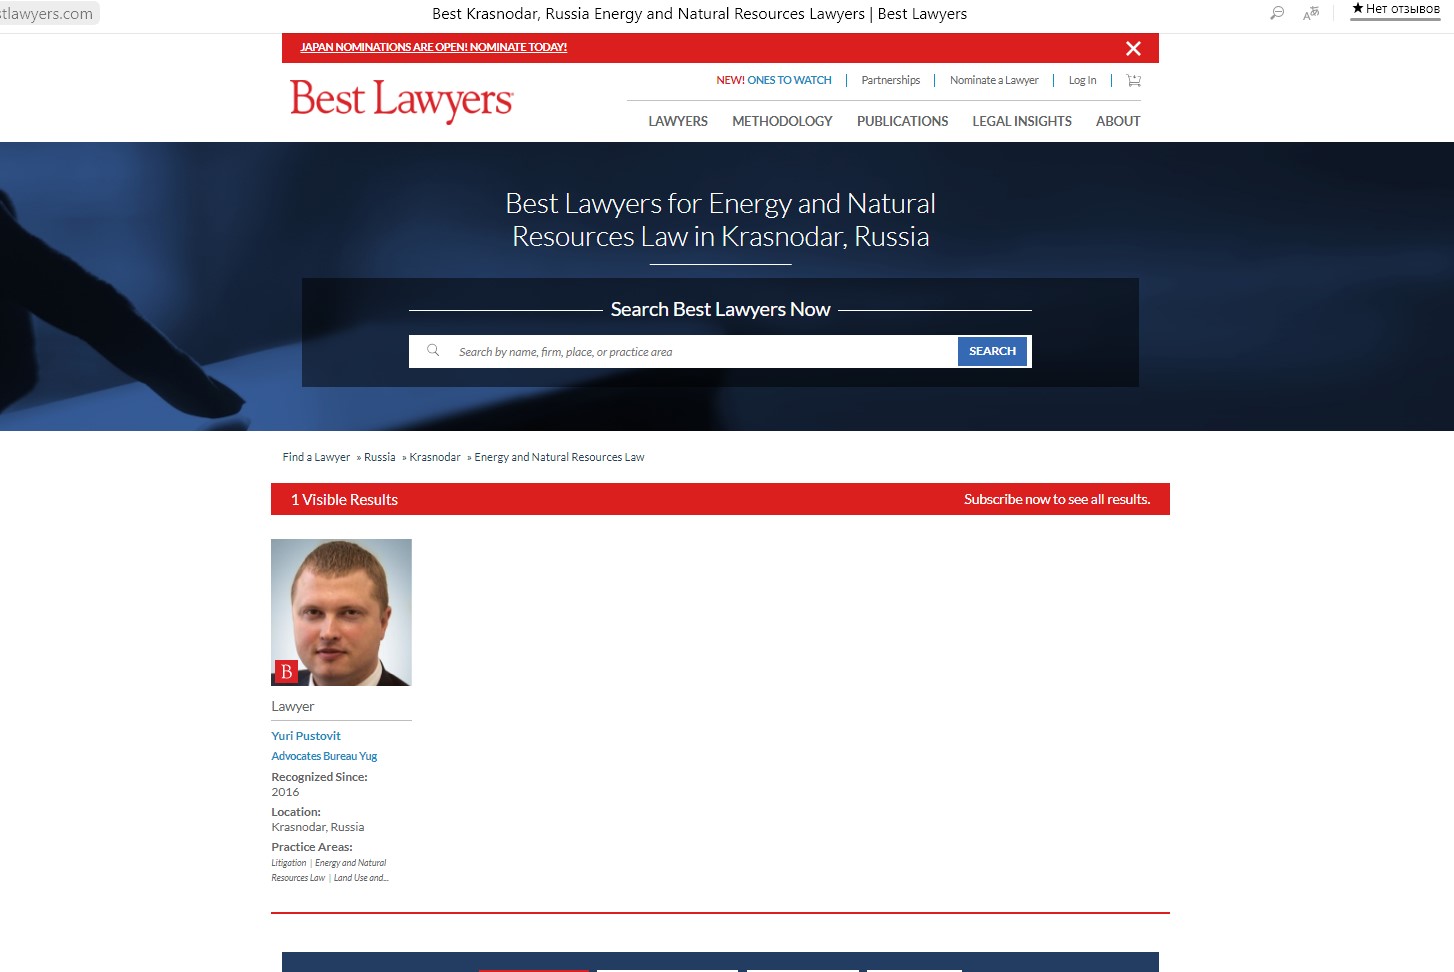 Best Lawyers Ranking 2021 Once Again Placed Advocates Bureau Yug Among the Best Russian Lawyers in Energy and Natural Resources Law, Land Law and Litigation